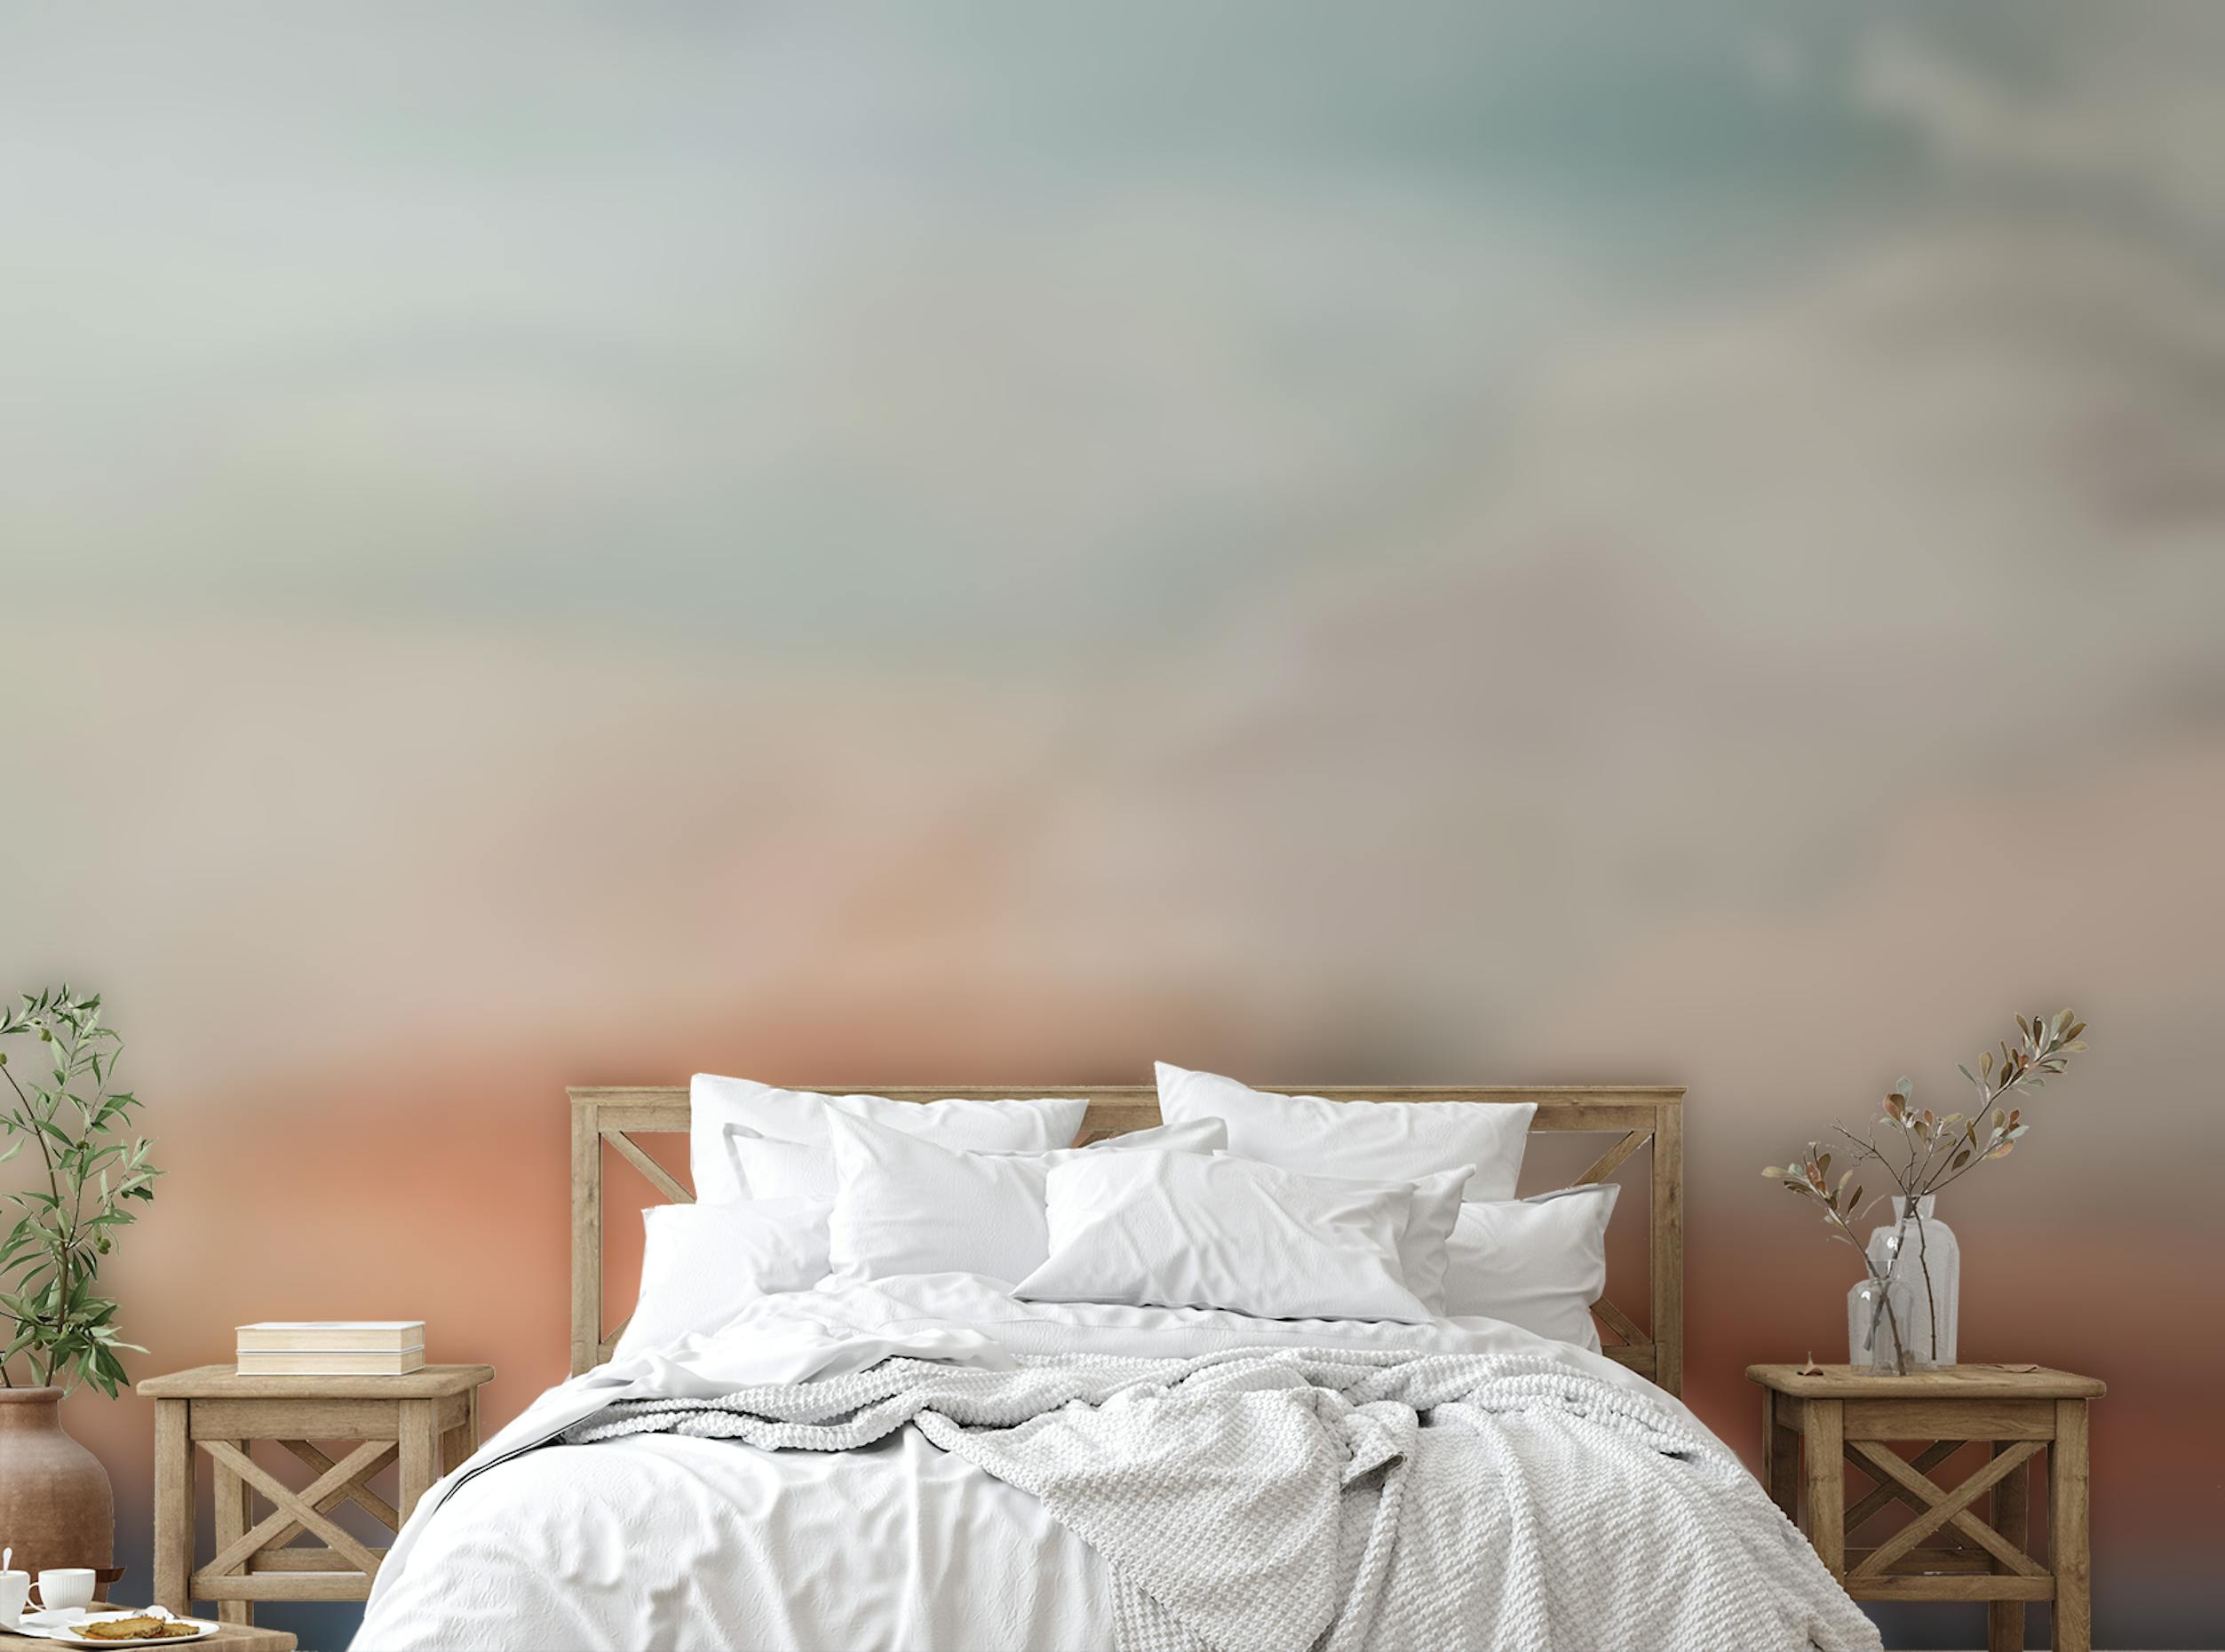 Peel and Stick Sunset Dreams Wall Mural